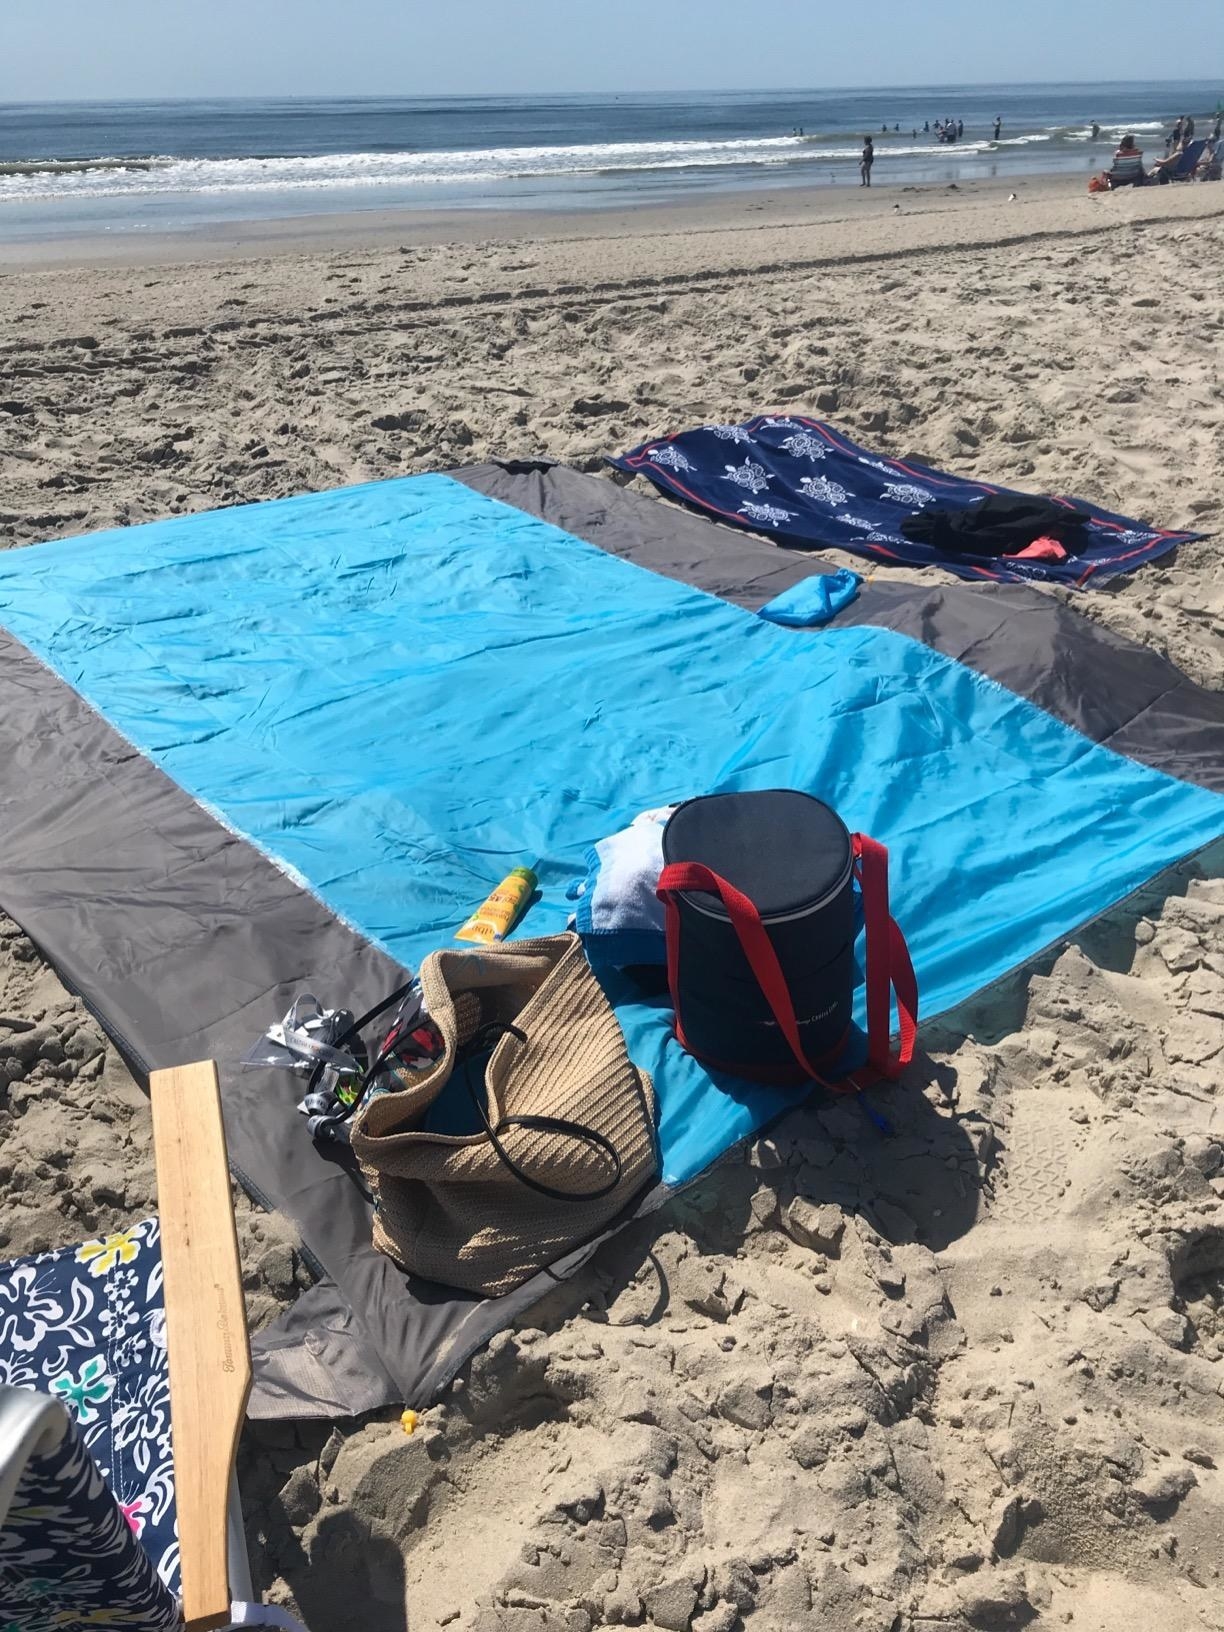 A gray and light blue beach blanket laid out on the beach